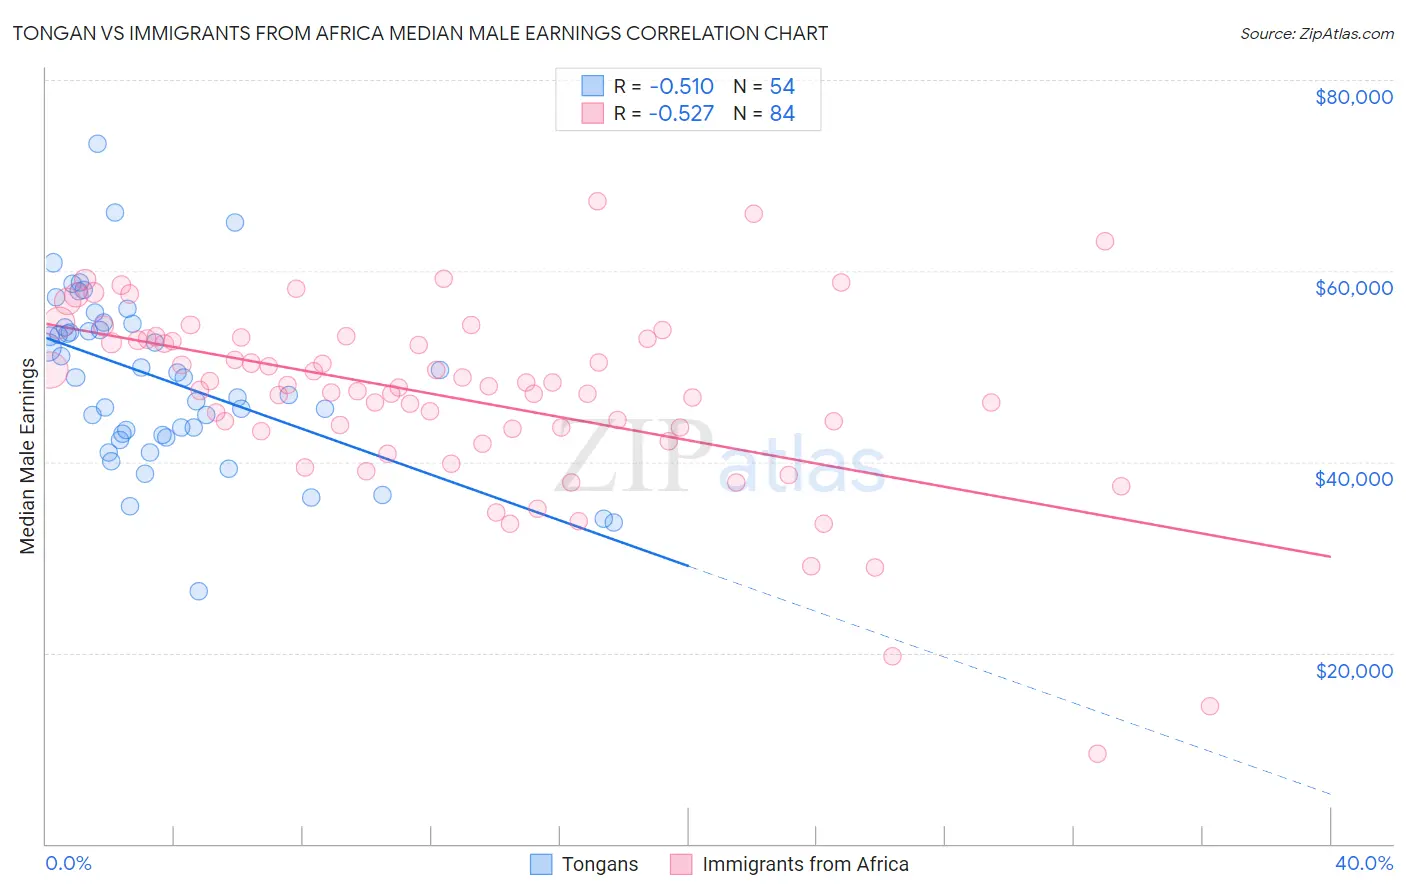 Tongan vs Immigrants from Africa Median Male Earnings